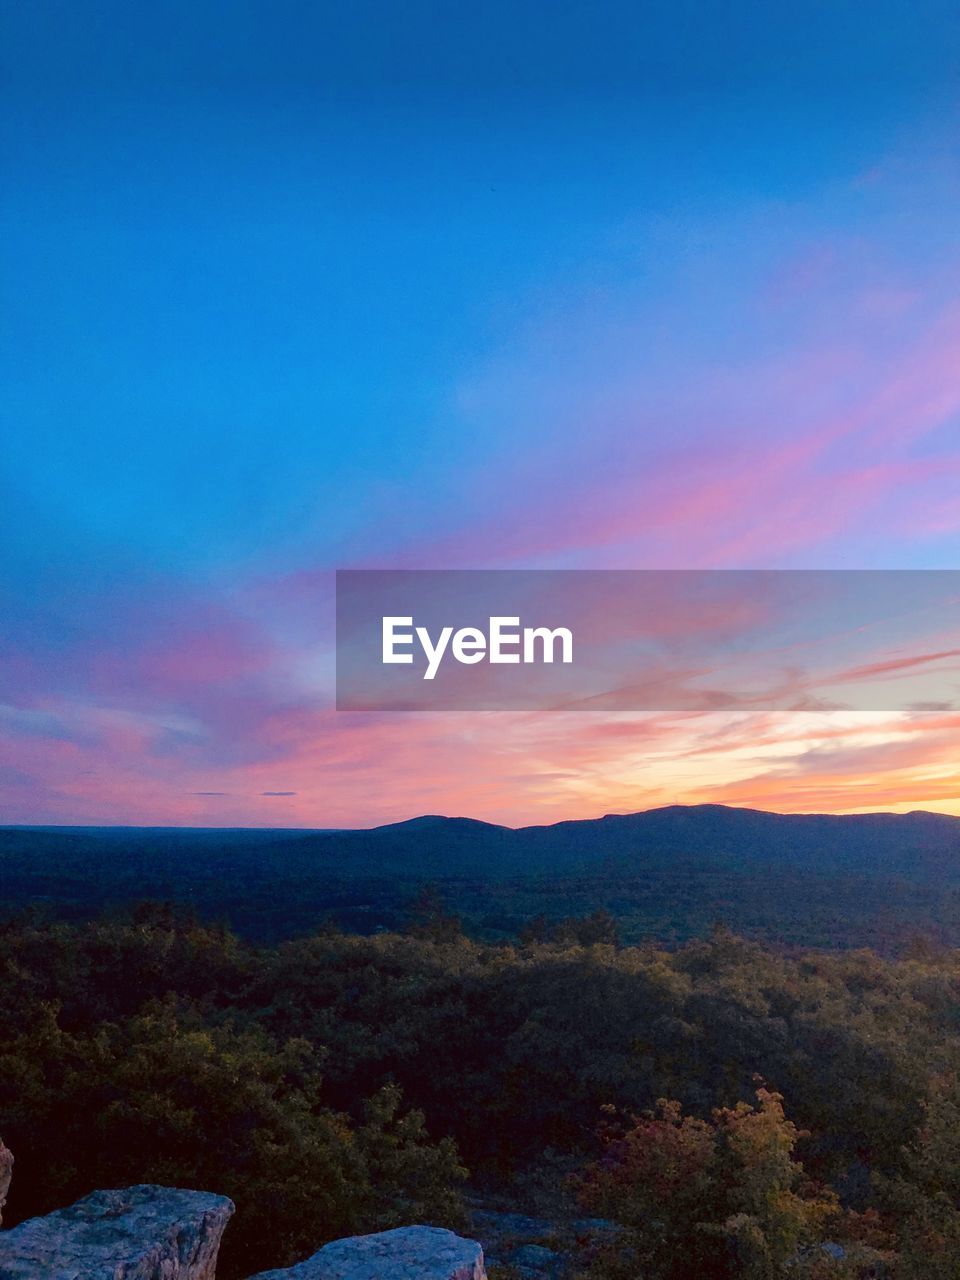 SCENIC VIEW OF MOUNTAINS AGAINST SKY AT SUNSET